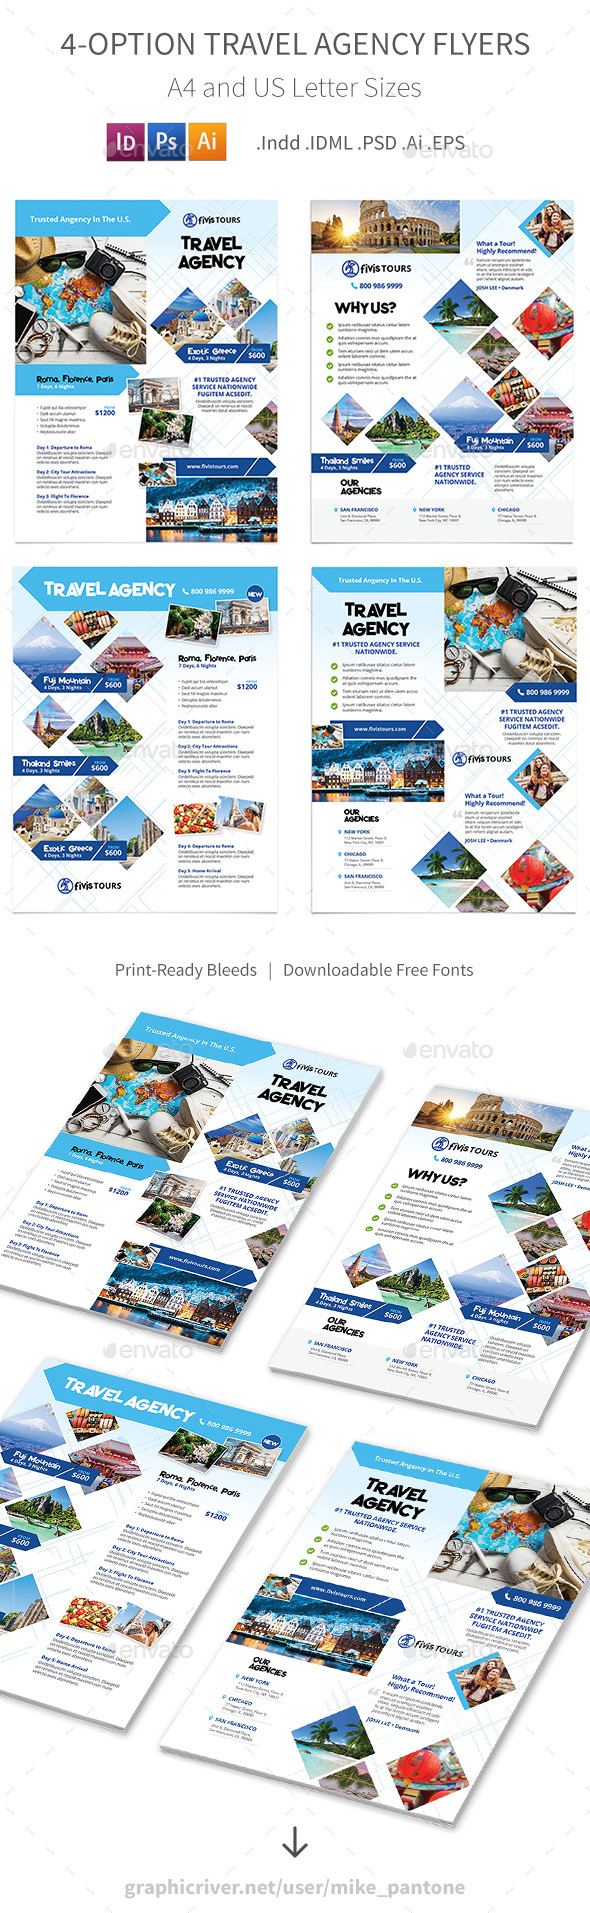 Travel Agency Flyers 3 – 4 Options